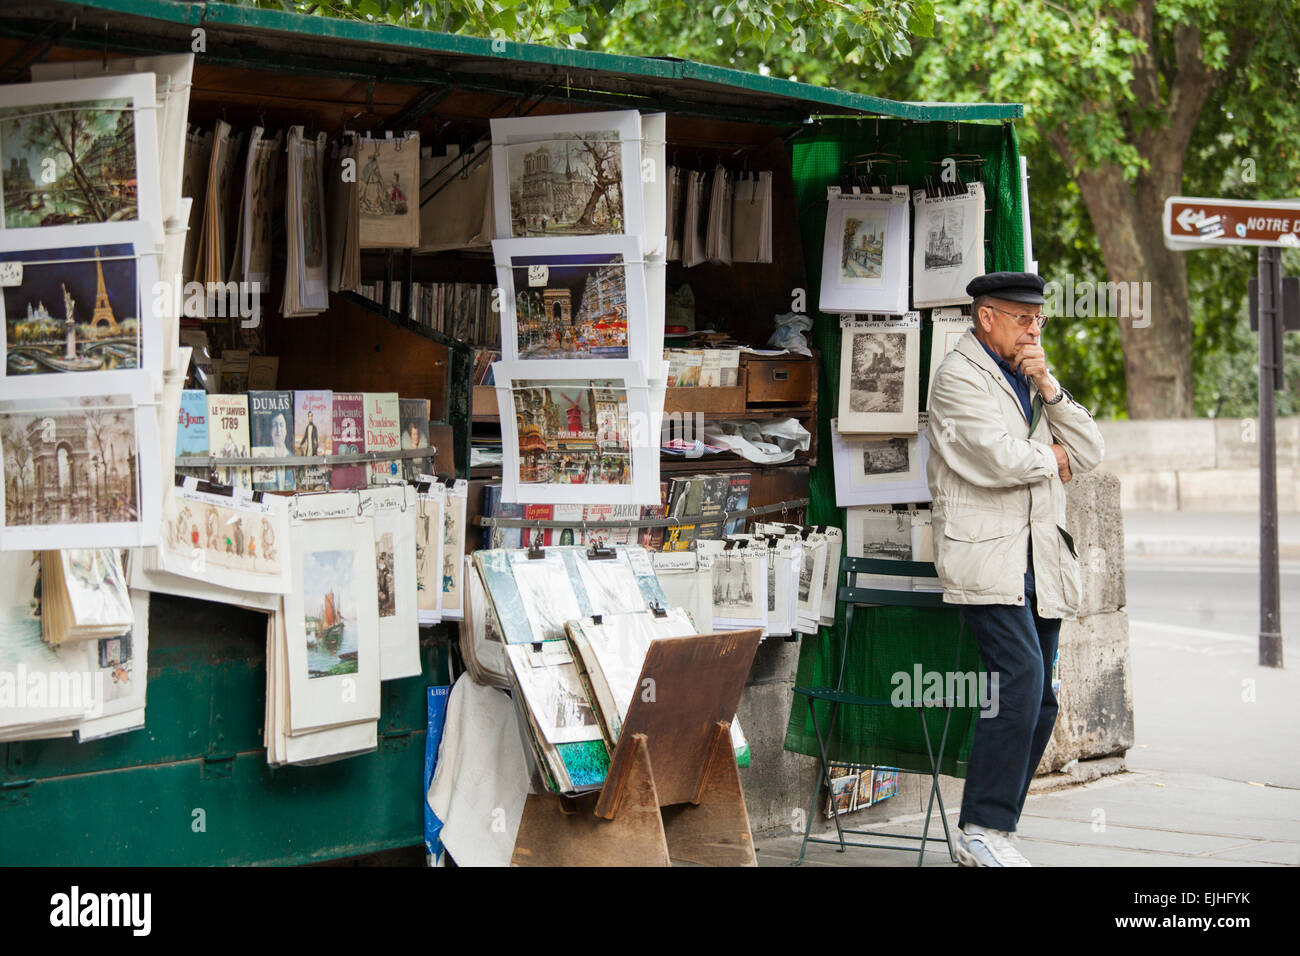 Bookseller stalls by the Seine, Paris, France Stock Photo